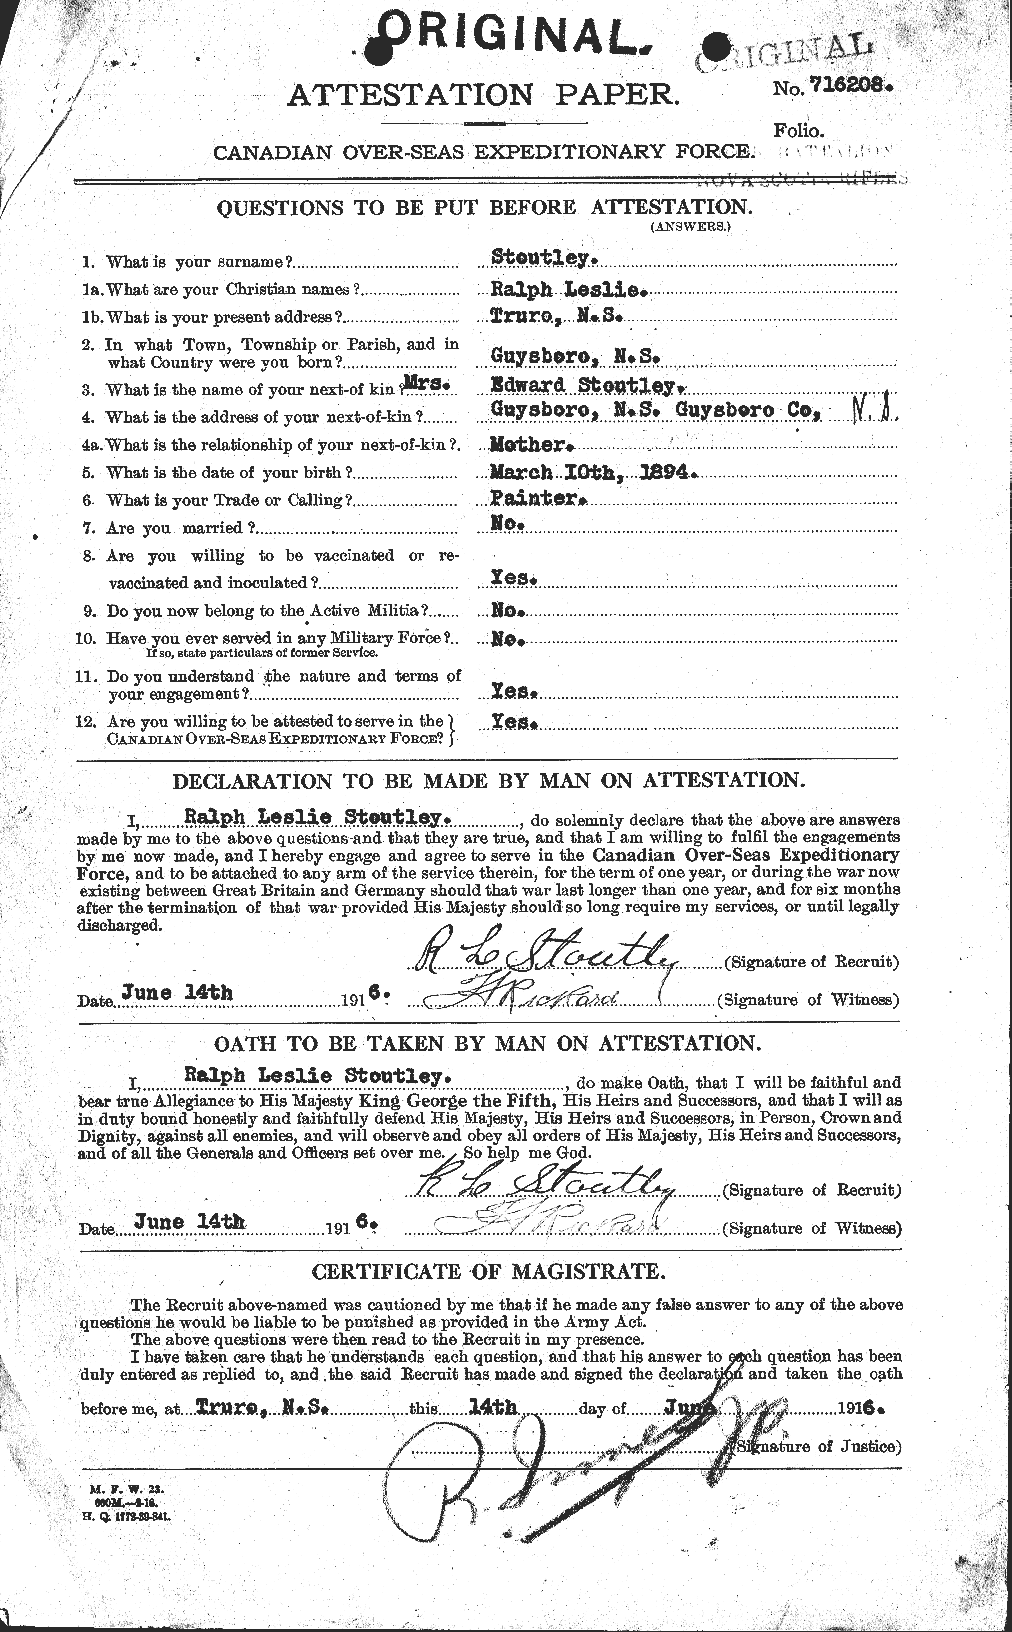 Personnel Records of the First World War - CEF 122454a